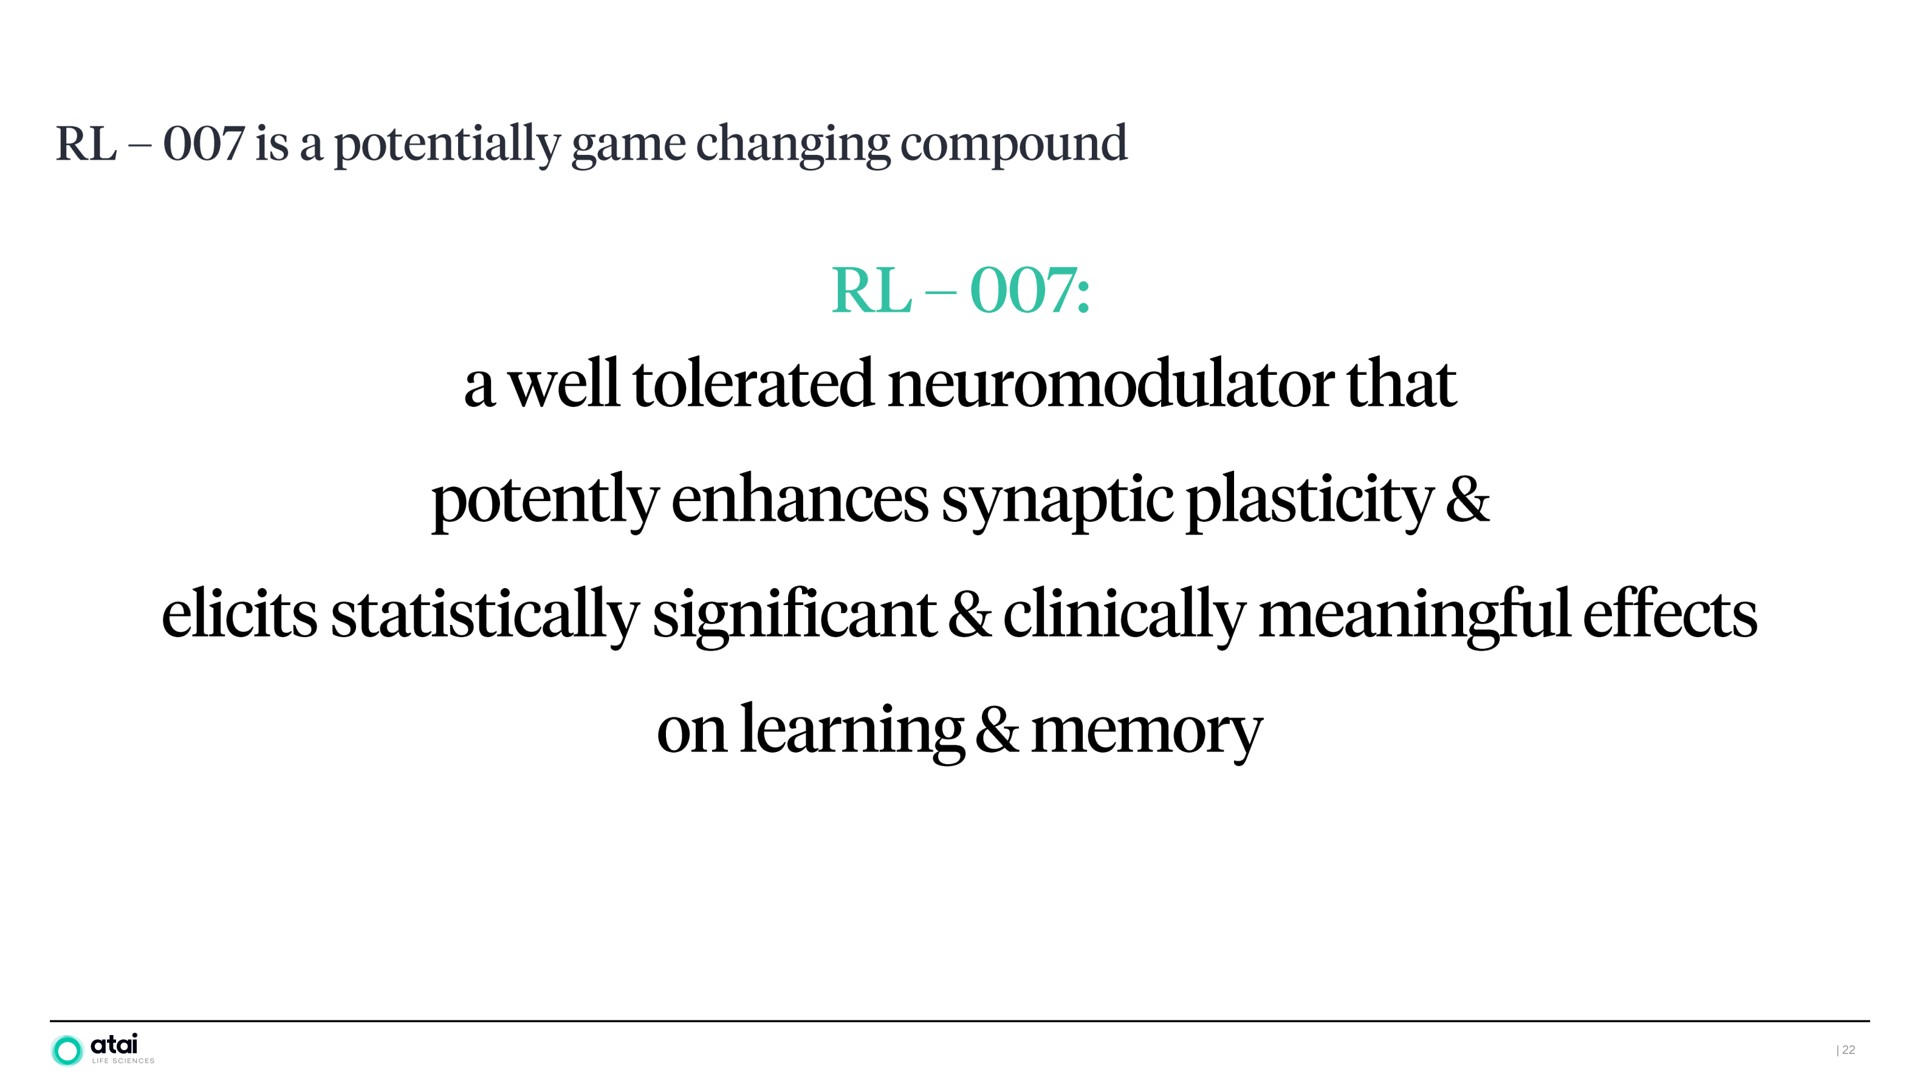 a well tolerated that potently enhances synaptic plasticity elicits statistically significant clinically meaningful effects on learning memory | ATAI